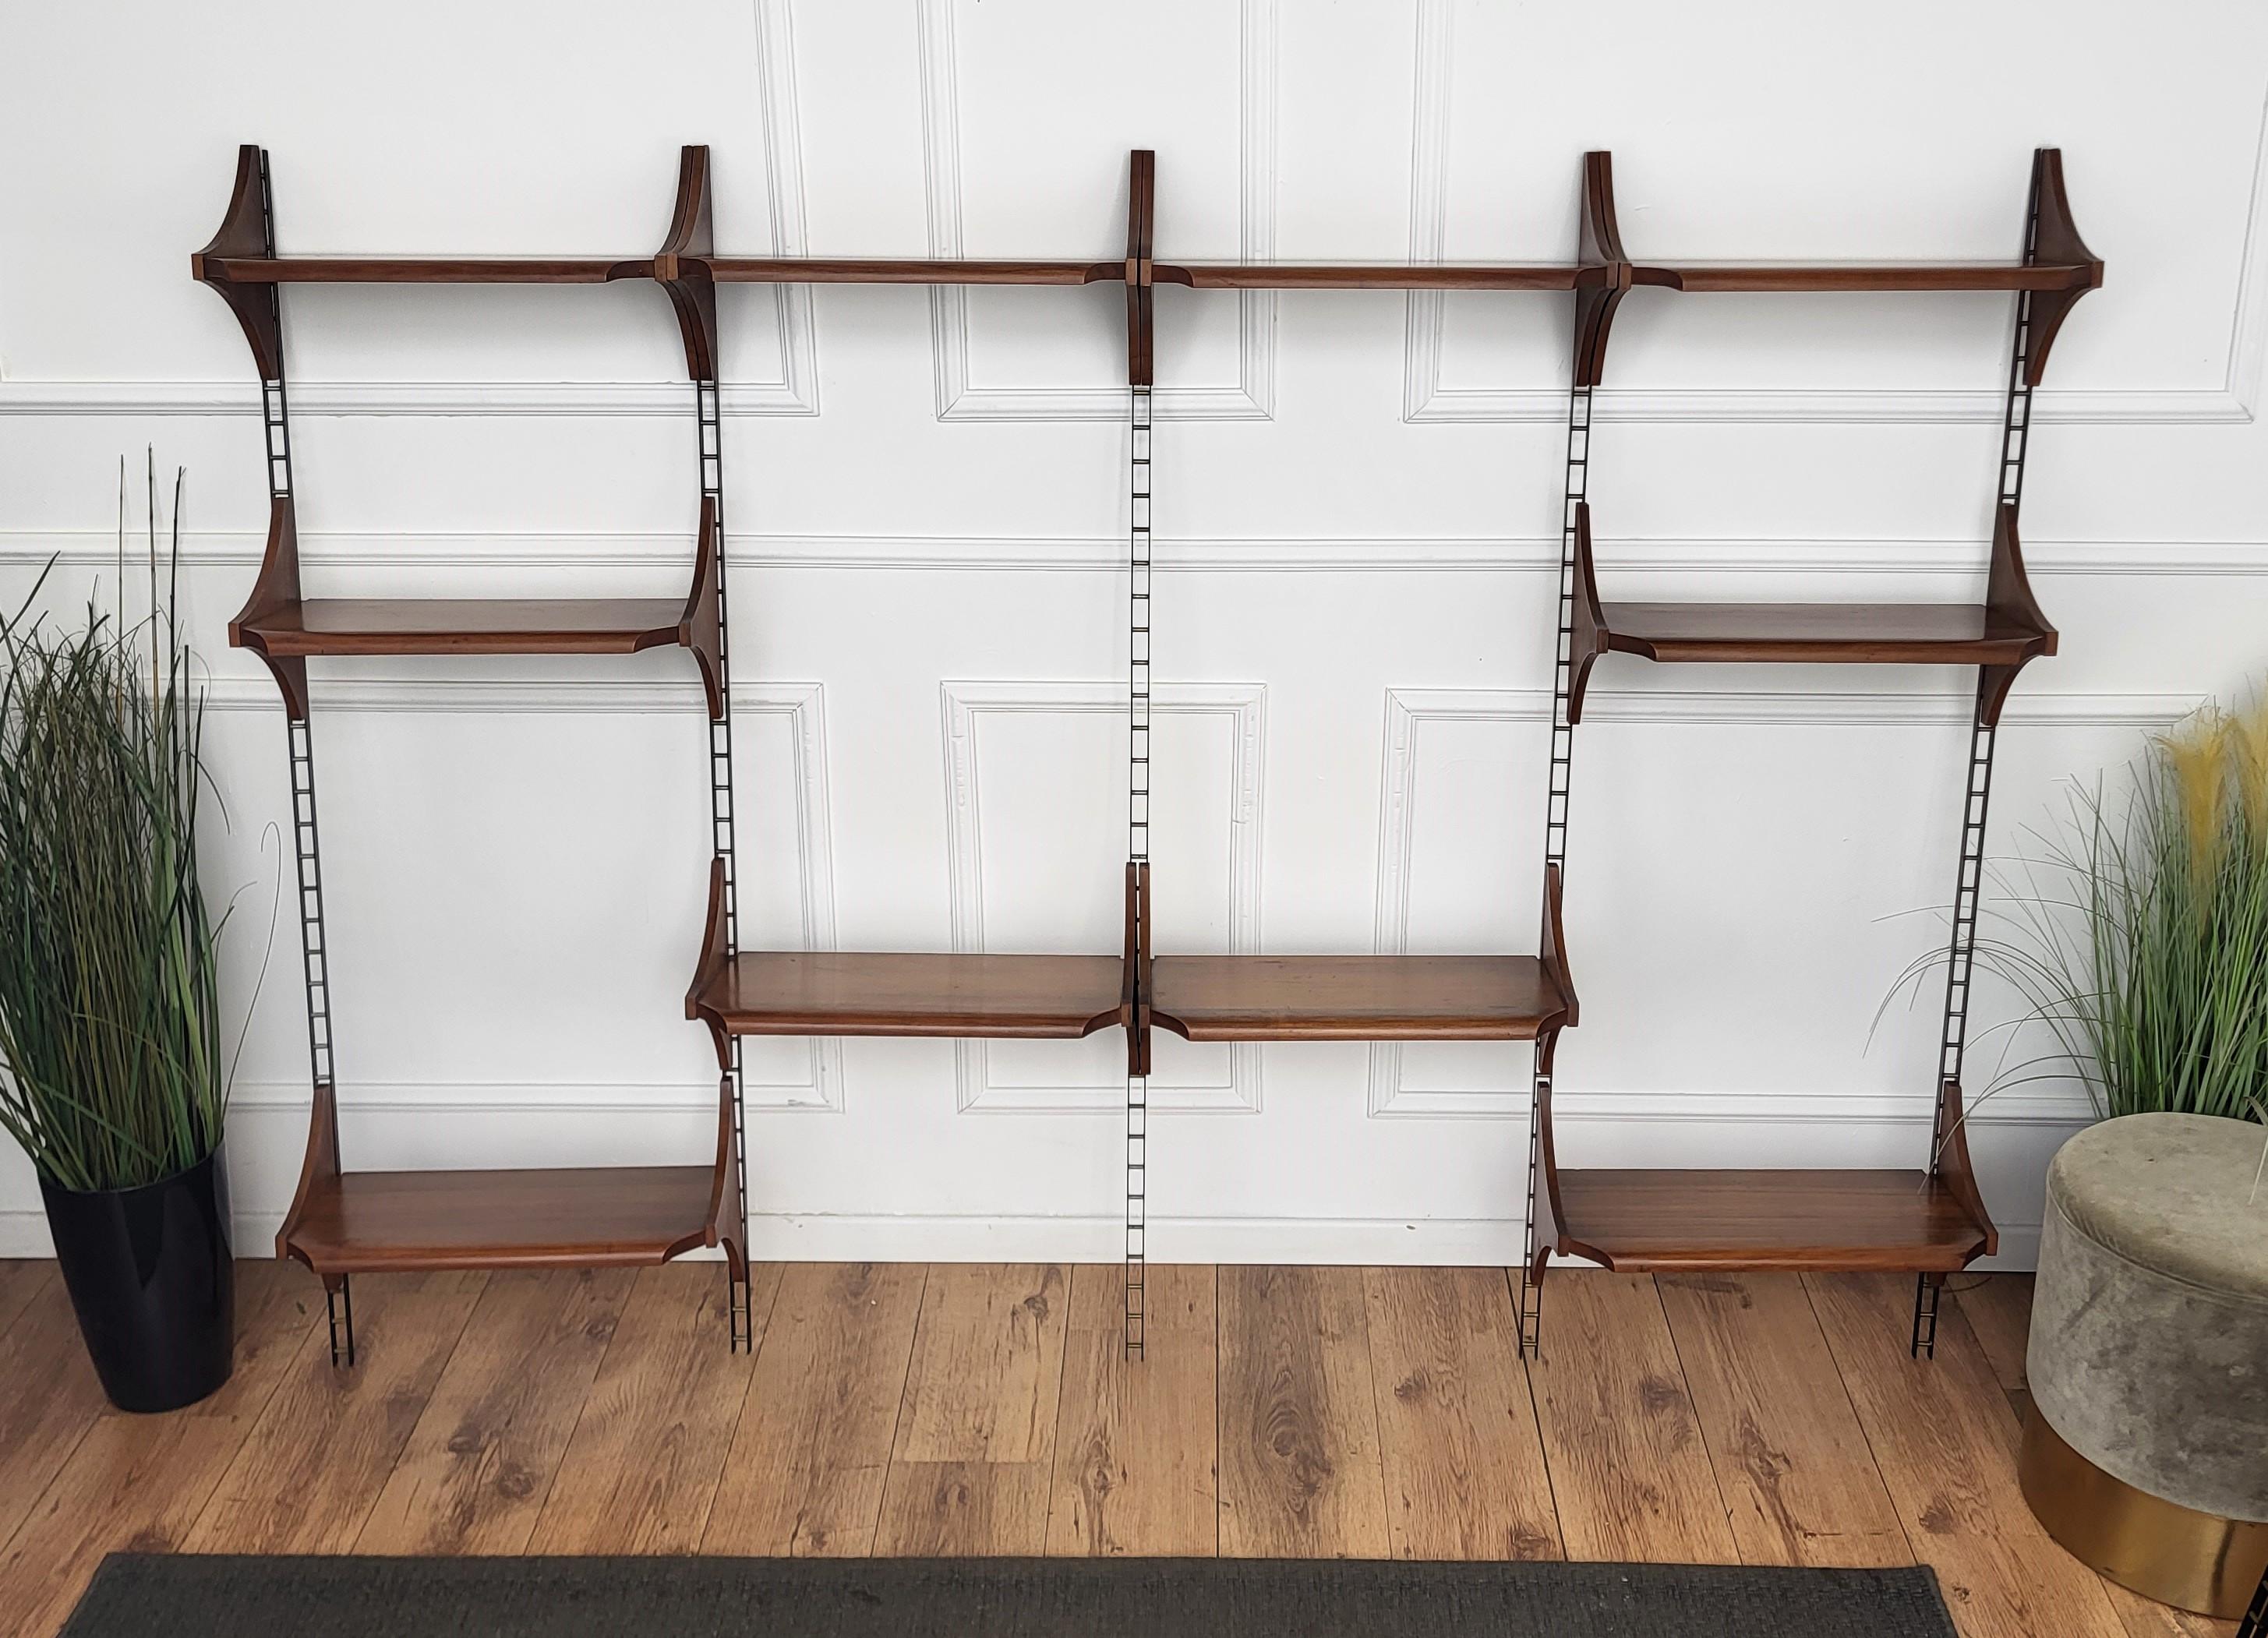 1950s Italian Wood Metal Modular Wall Shelving System Bookcase 10 Shelves For Sale 1